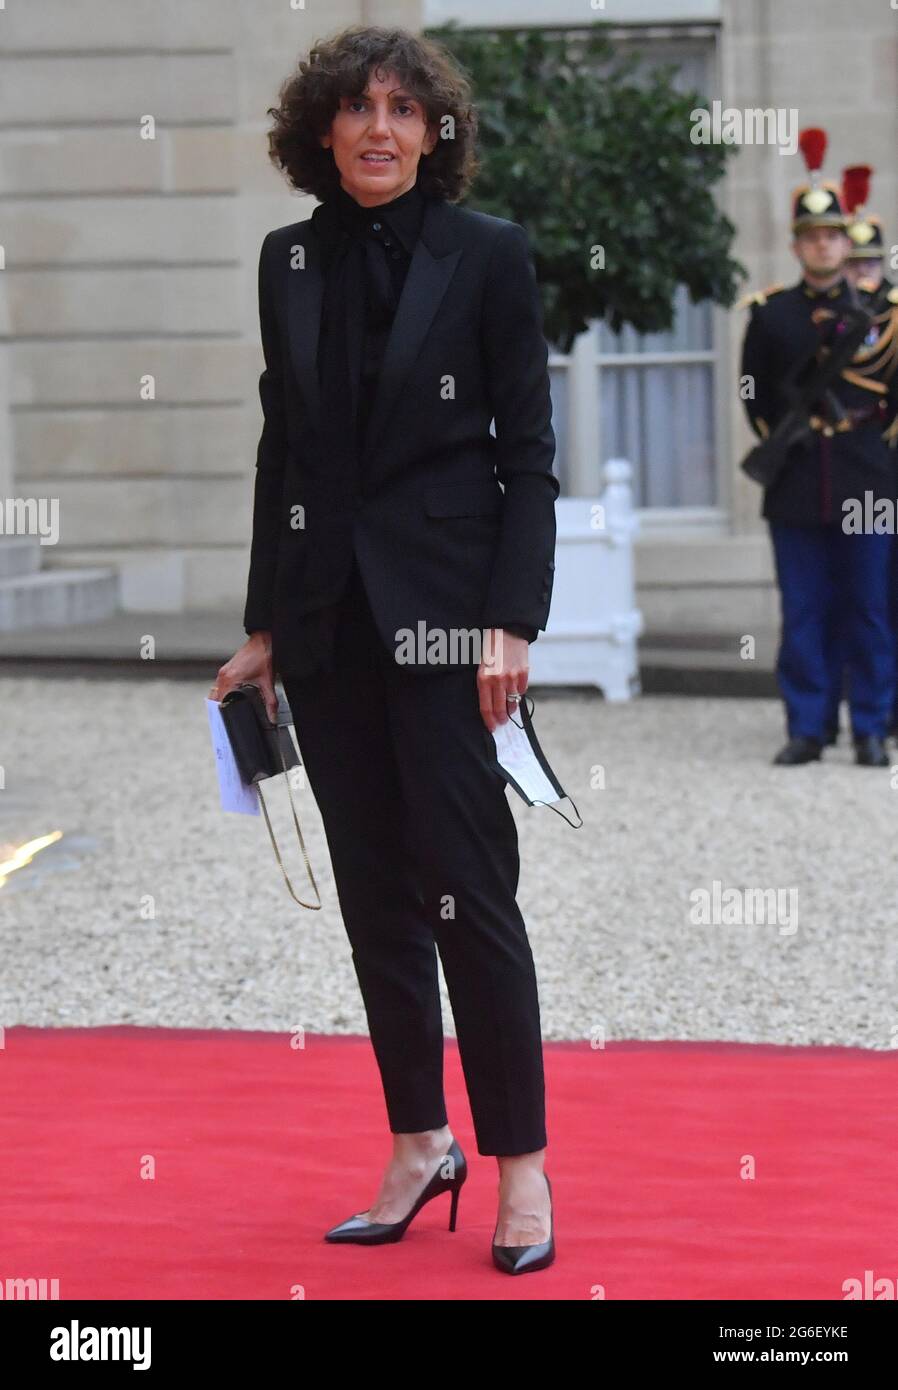 Chief executive officer of Yves Saint Laurent, Francesca Bellettini  arriving for a state dinner with the French President Emmanuel Macron and  the Italian President Sergio Mattarella at the Elysee Palace in Paris,